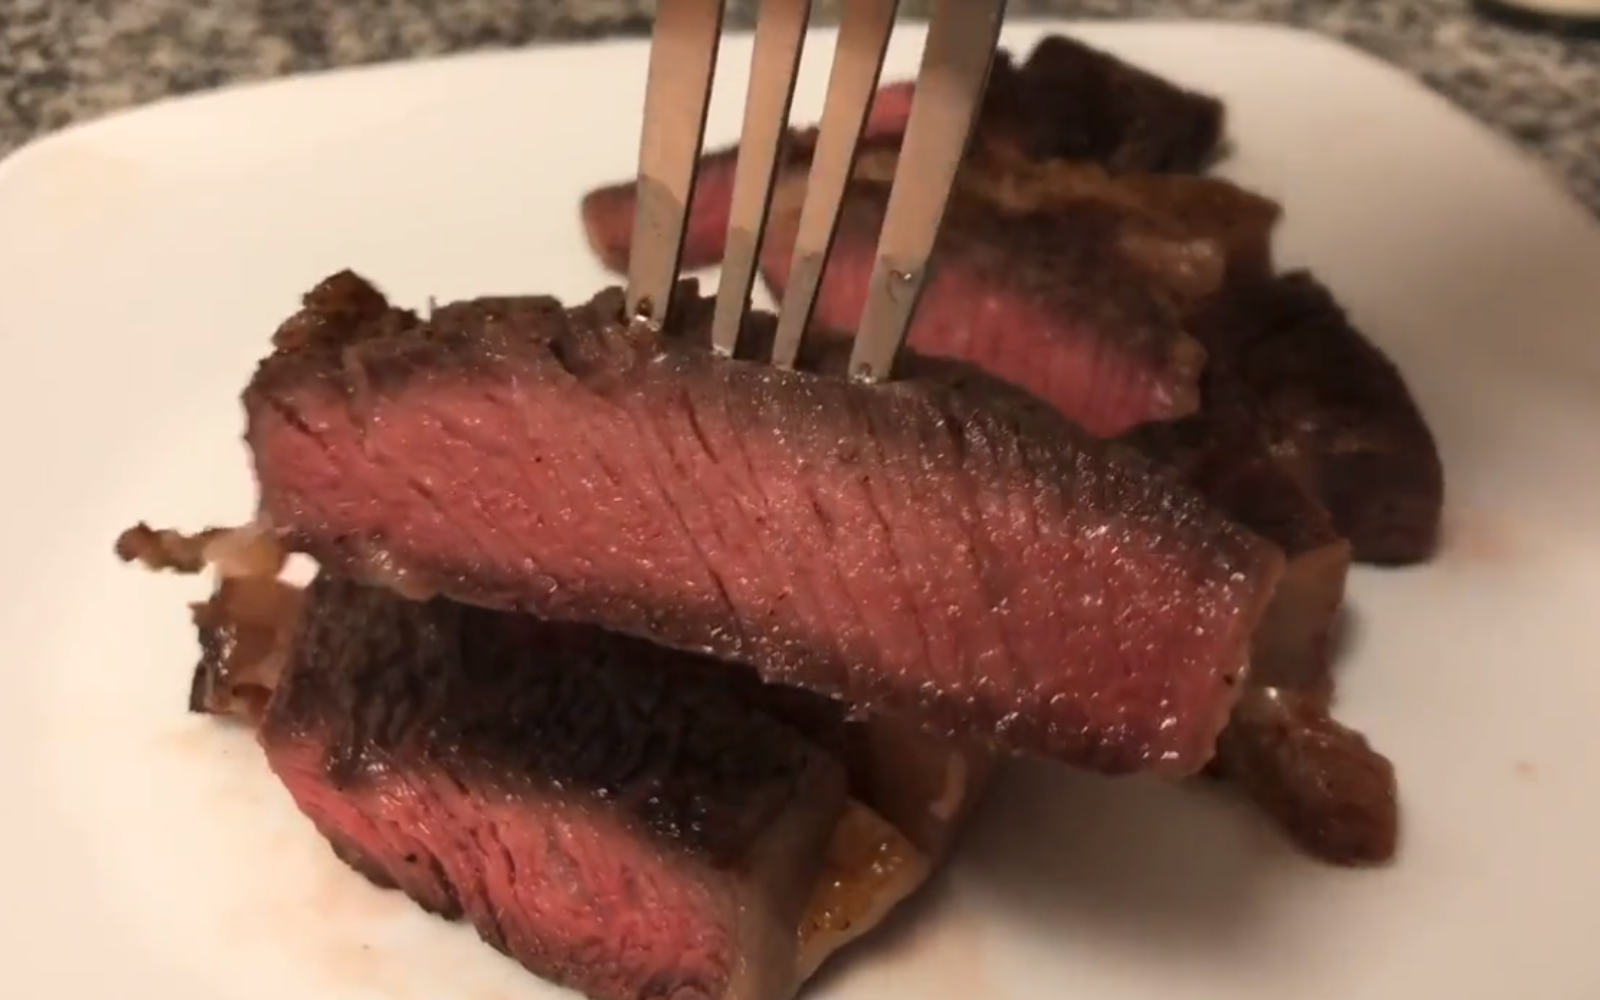 After refusing to cook a $120 steak well done for a woman, man is divided